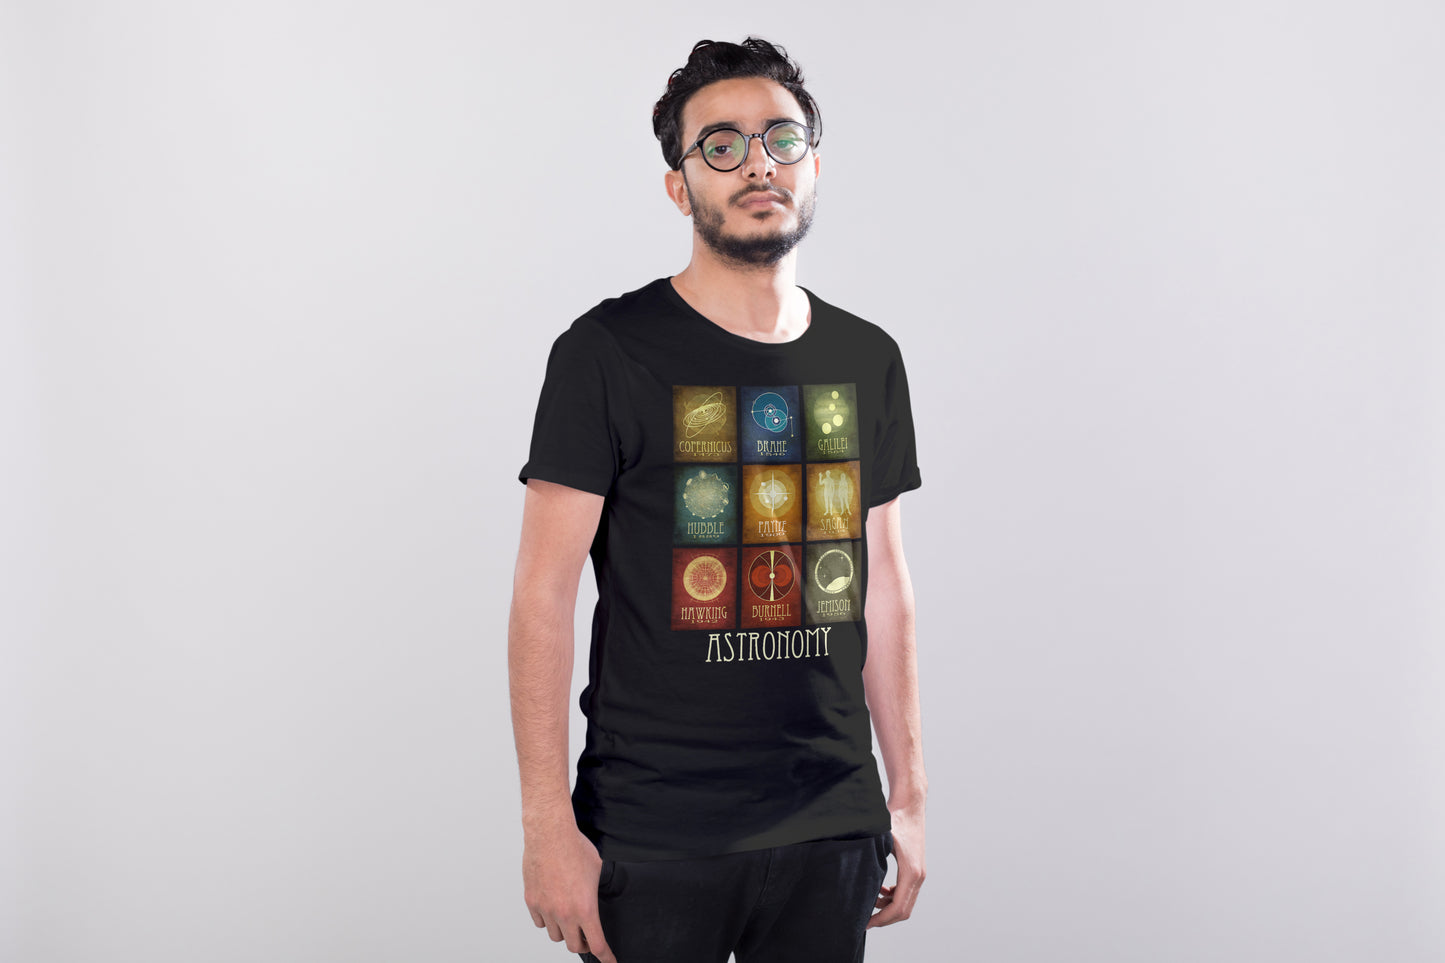 Astronomy T-shirt, Mosaic of 9 Astronomers in History